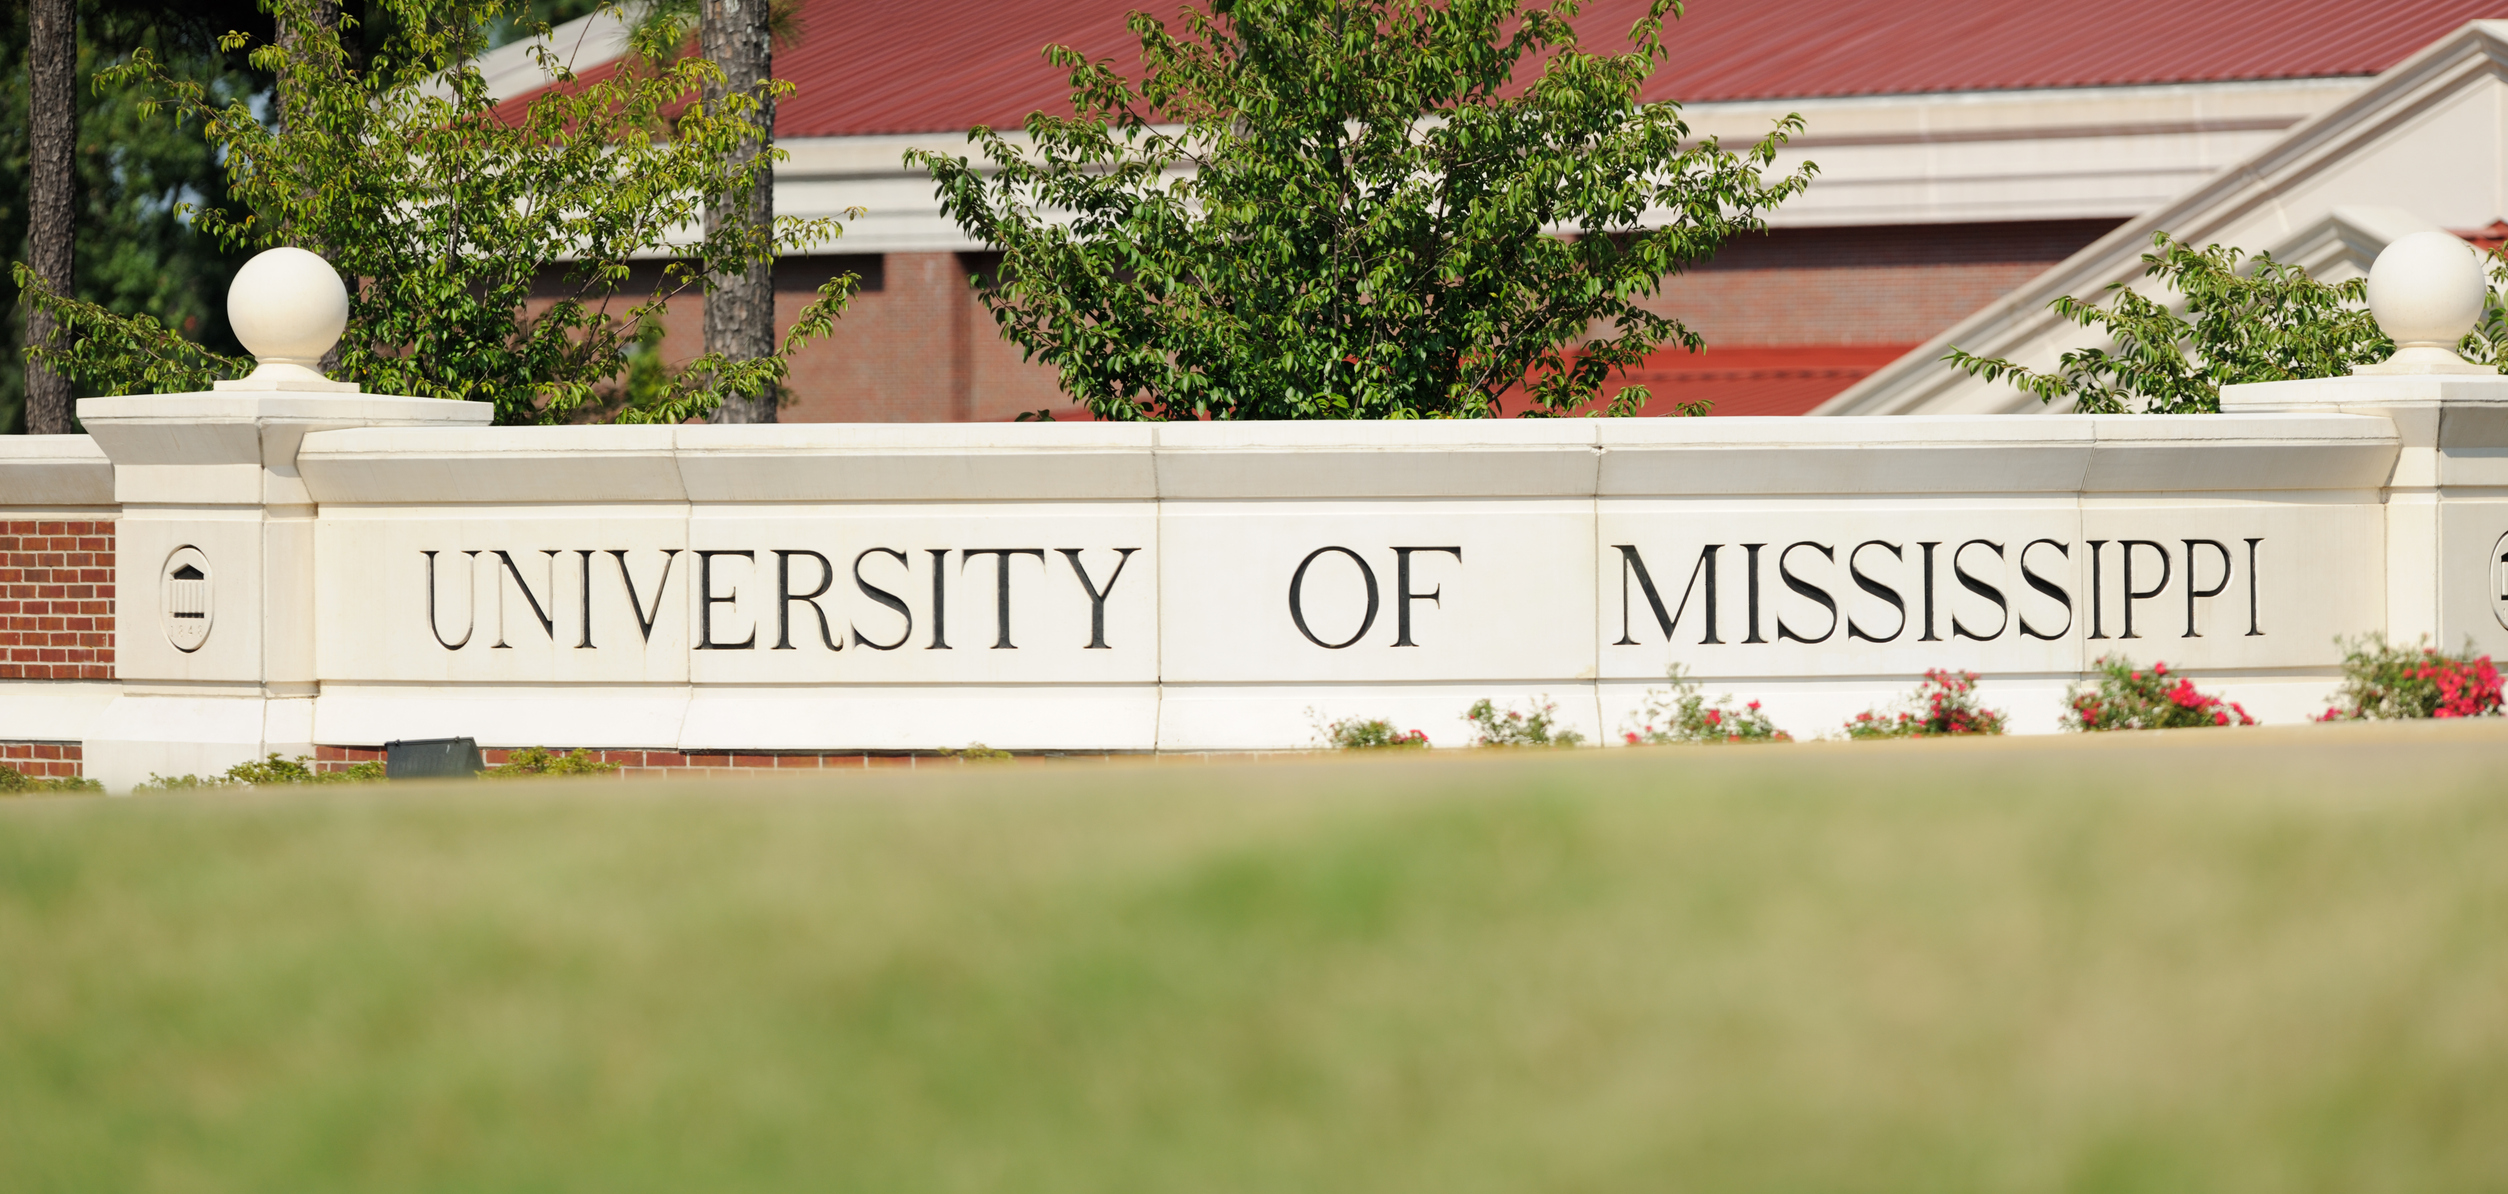 Ole Miss Student Kicked Out Of Fraternity After Video Caught Racist Gestures Toward Protester